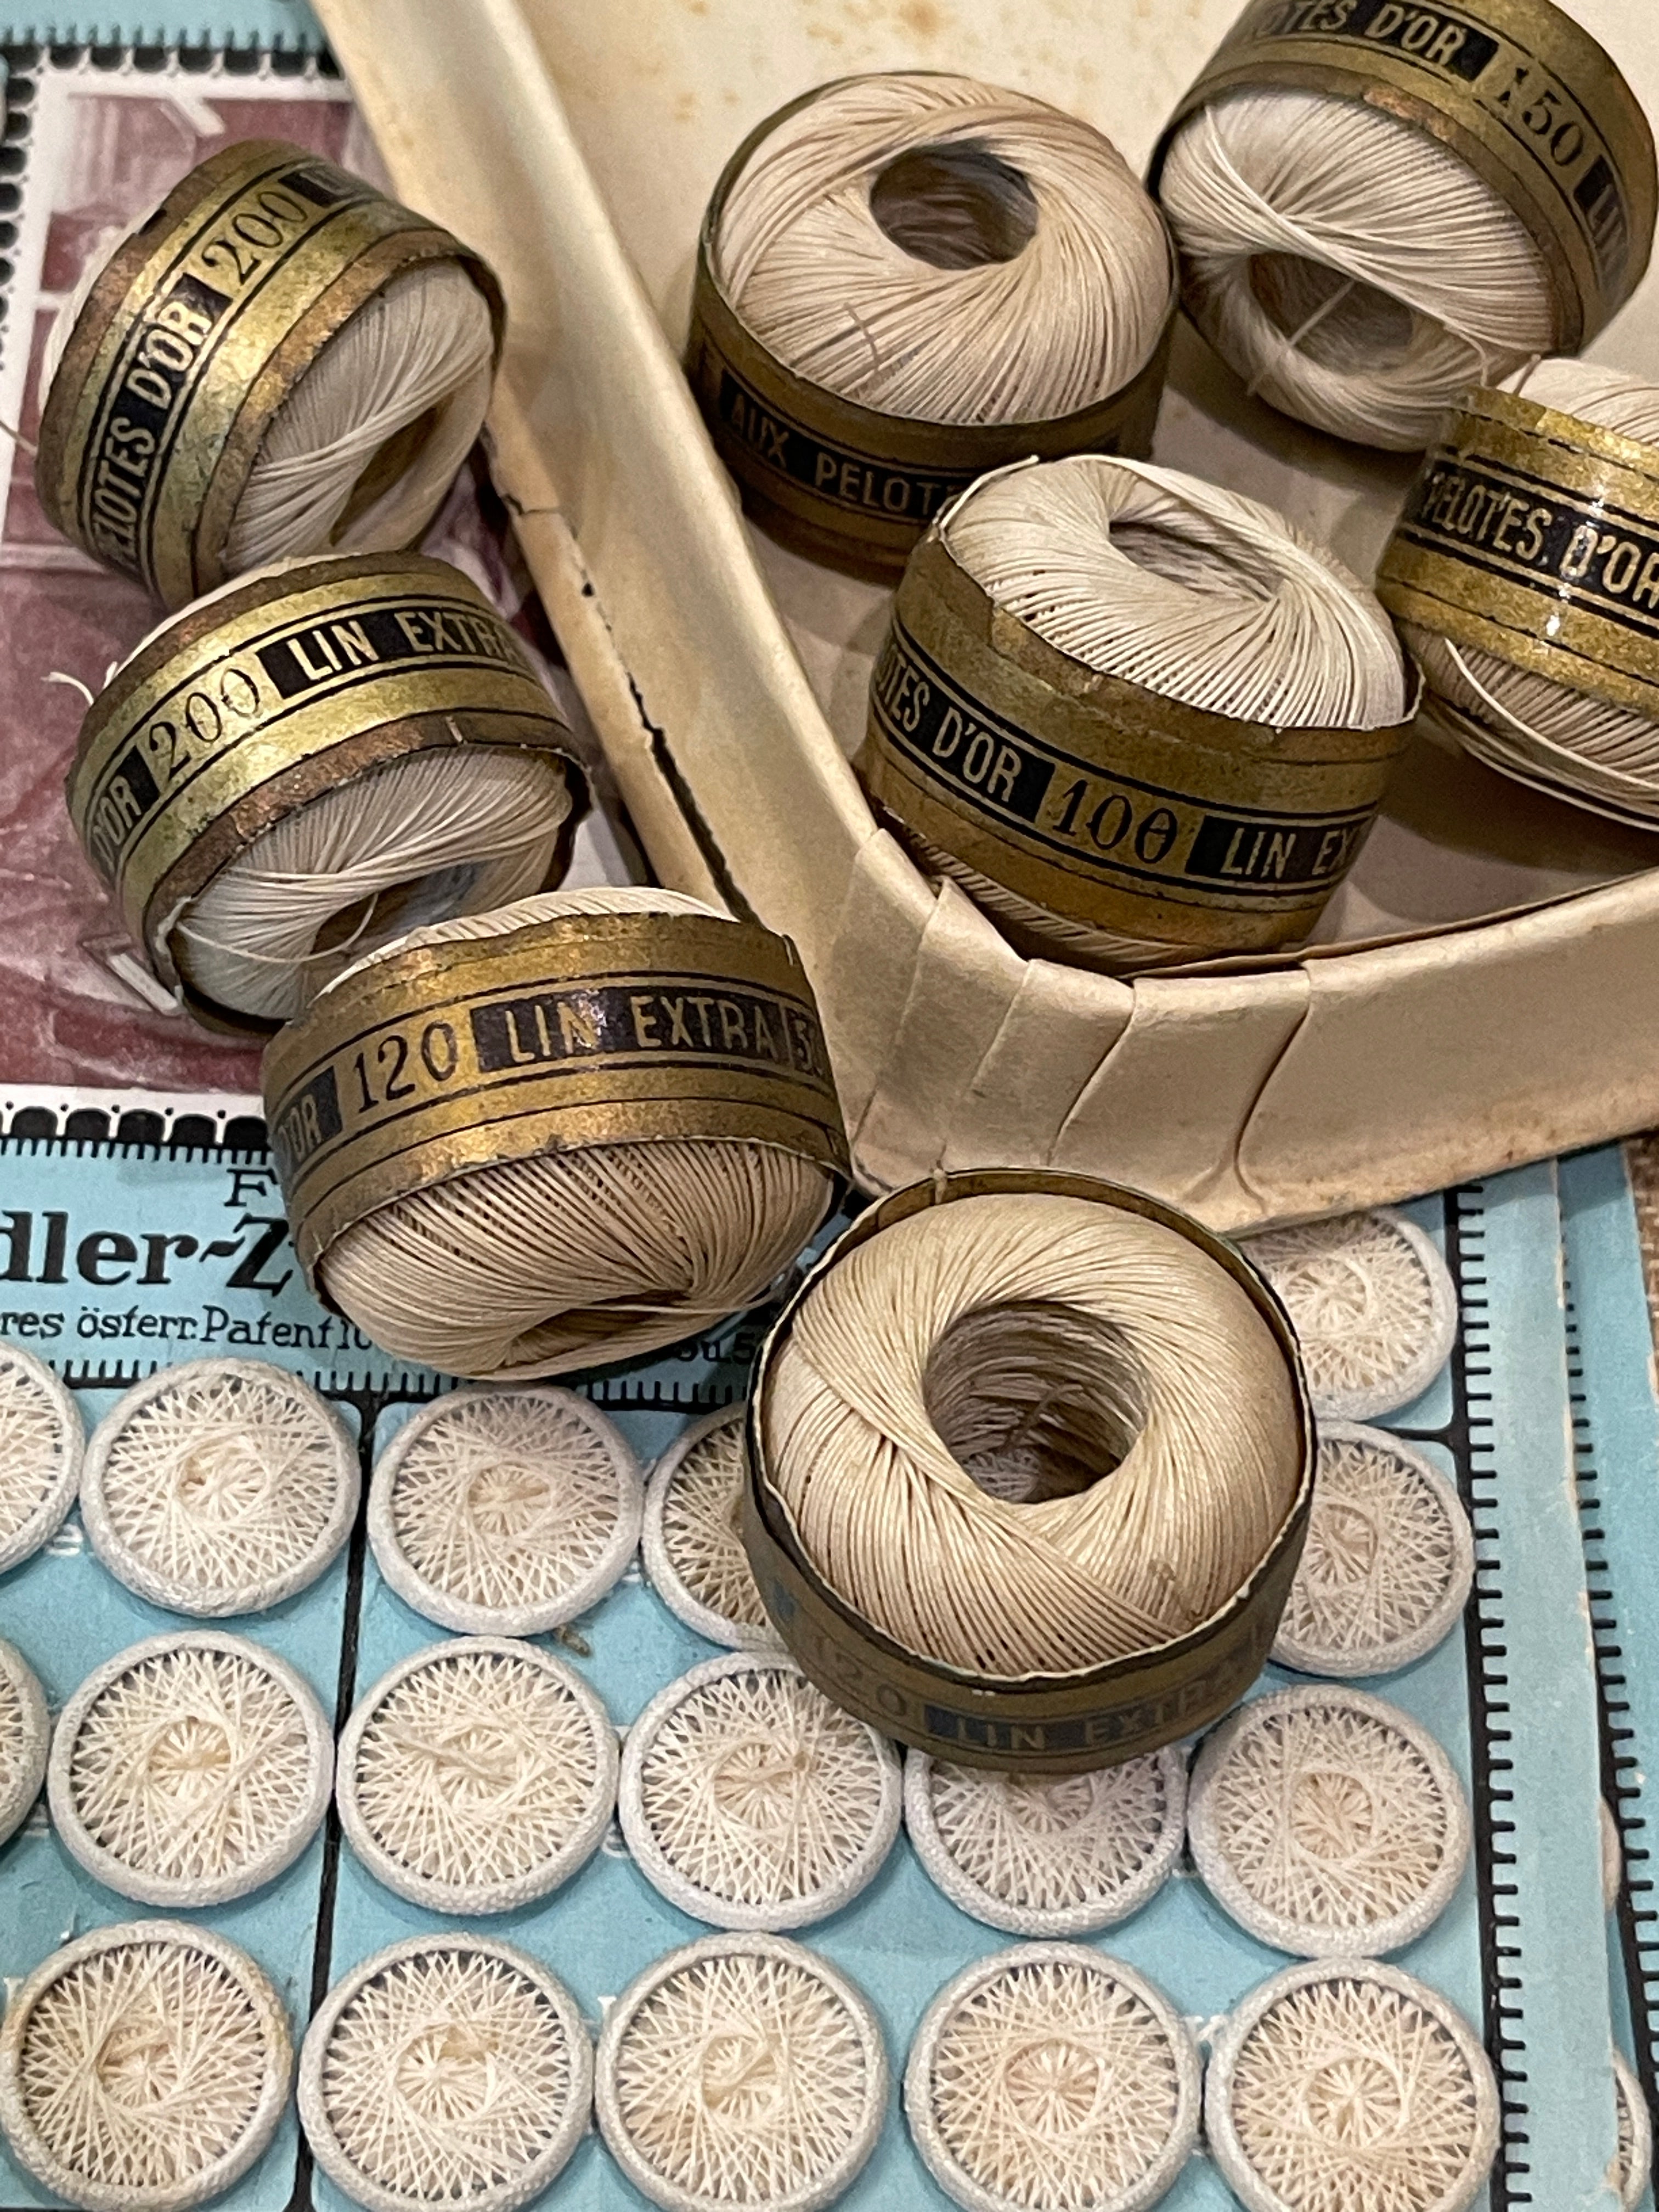 Haberdashery collection of ECRU Linen AUXPELOTES D'OR thread